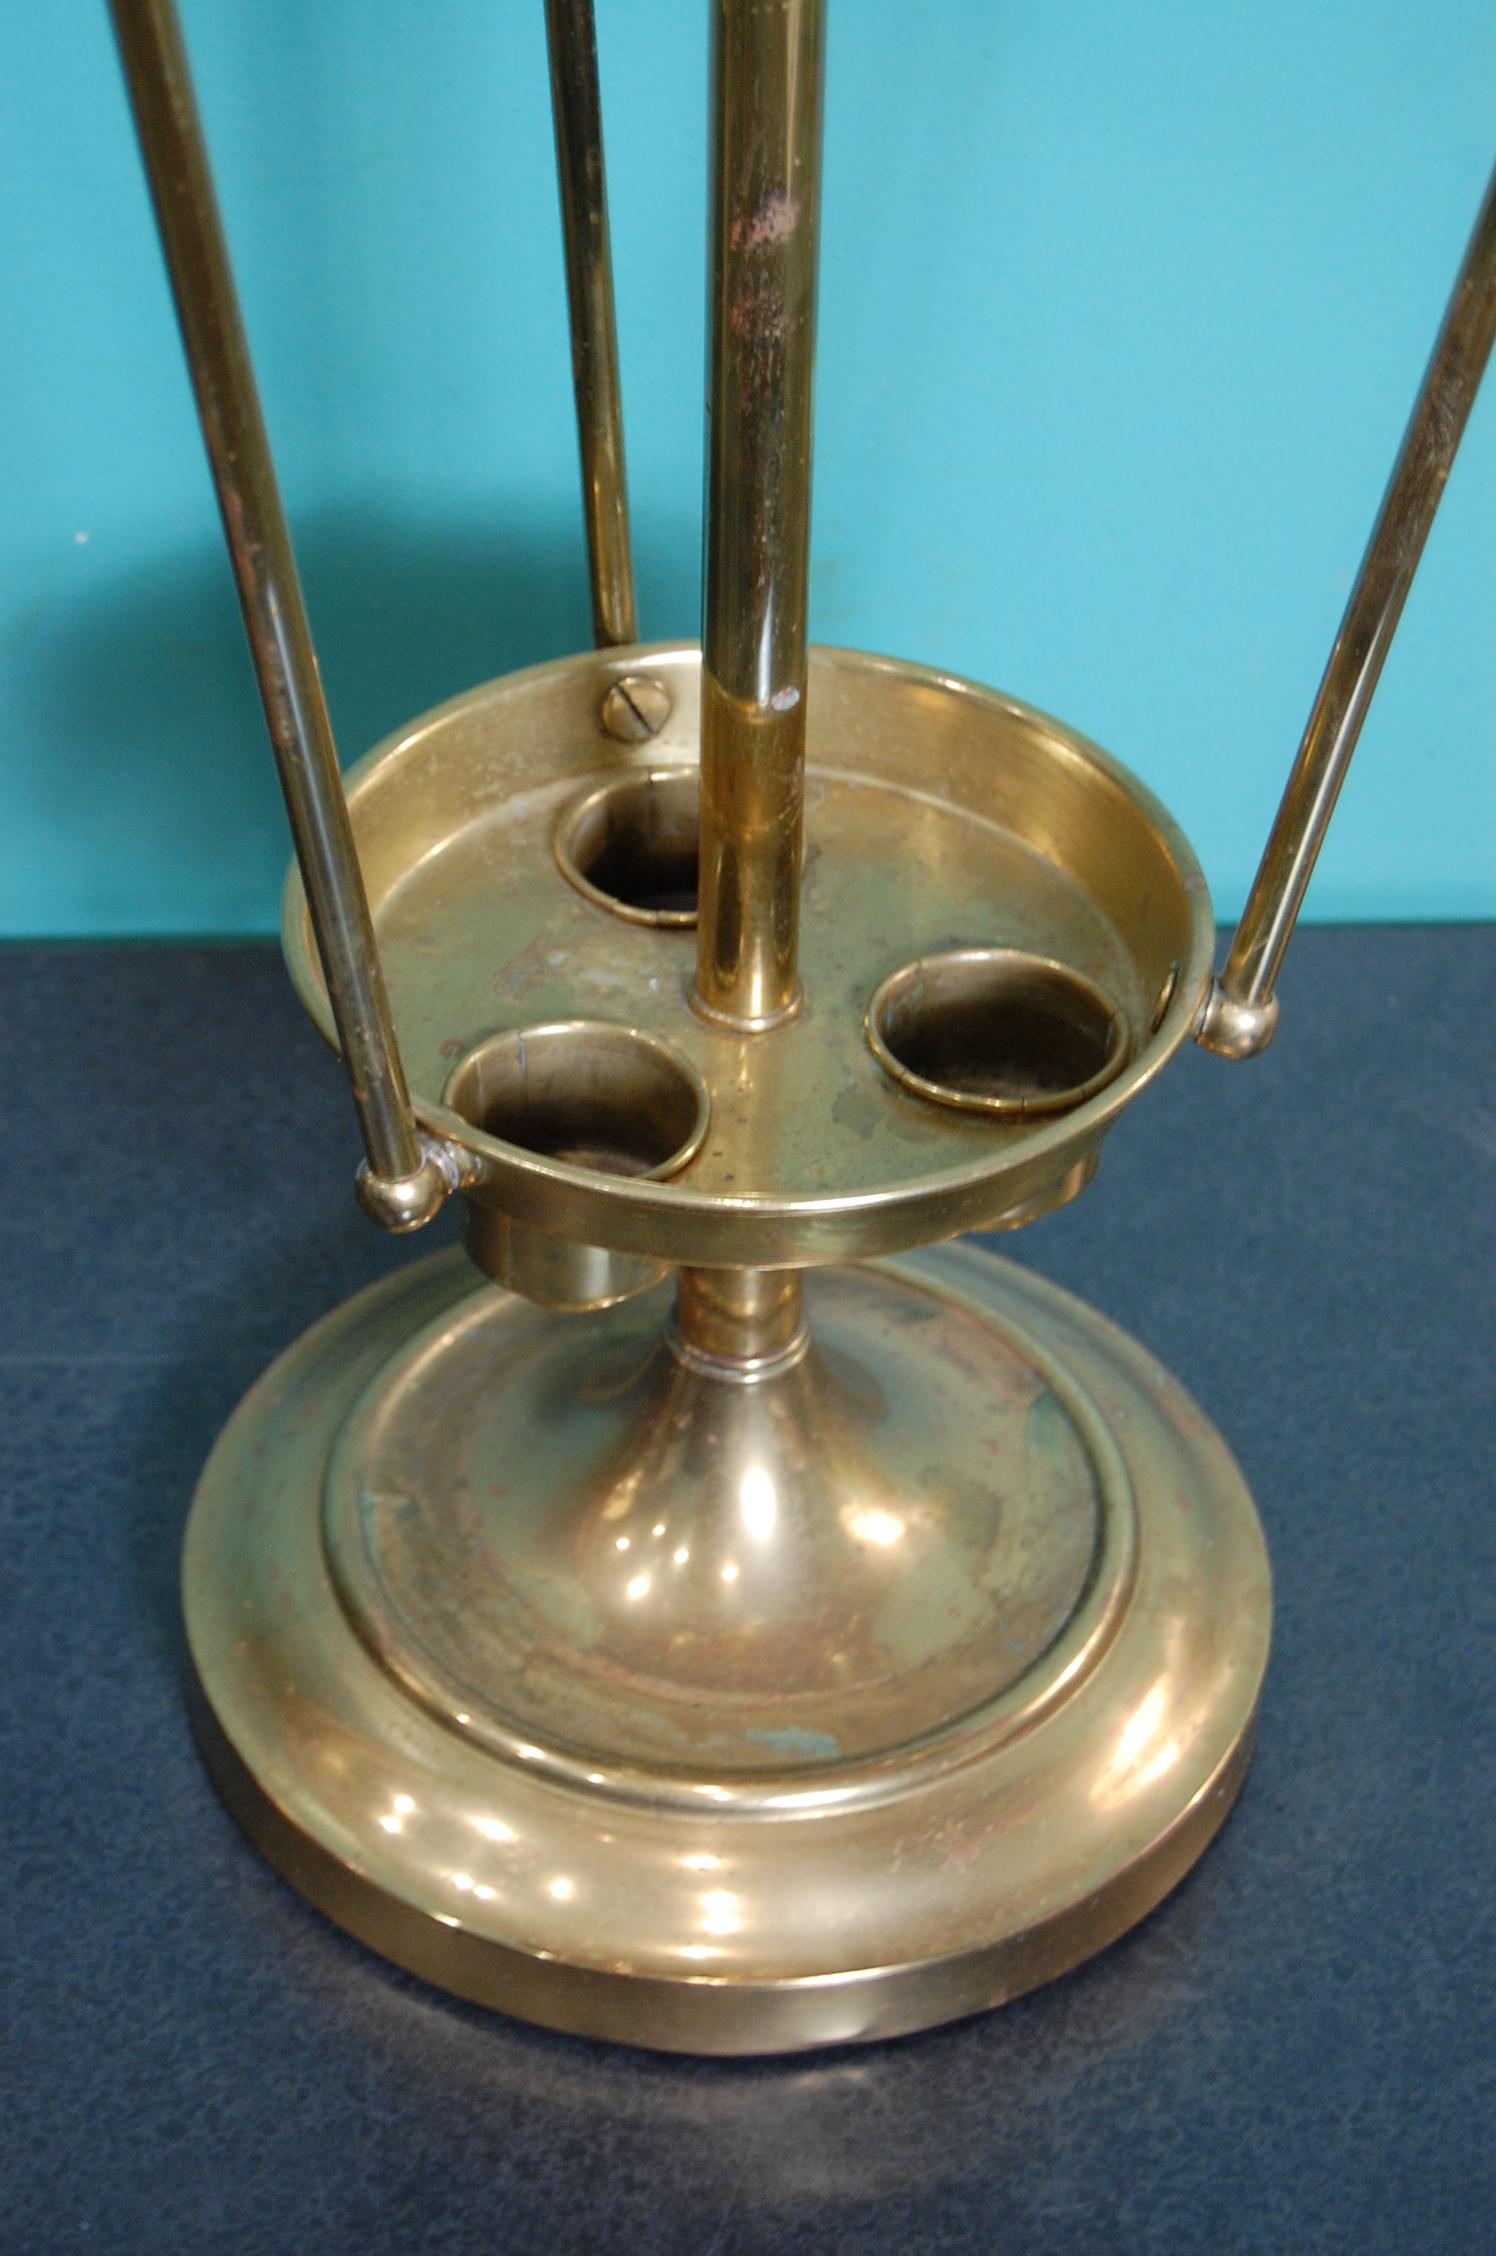 Mid-20th Century Brass Umbrella Stand by Herco Art Manufacturing Company For Sale 2